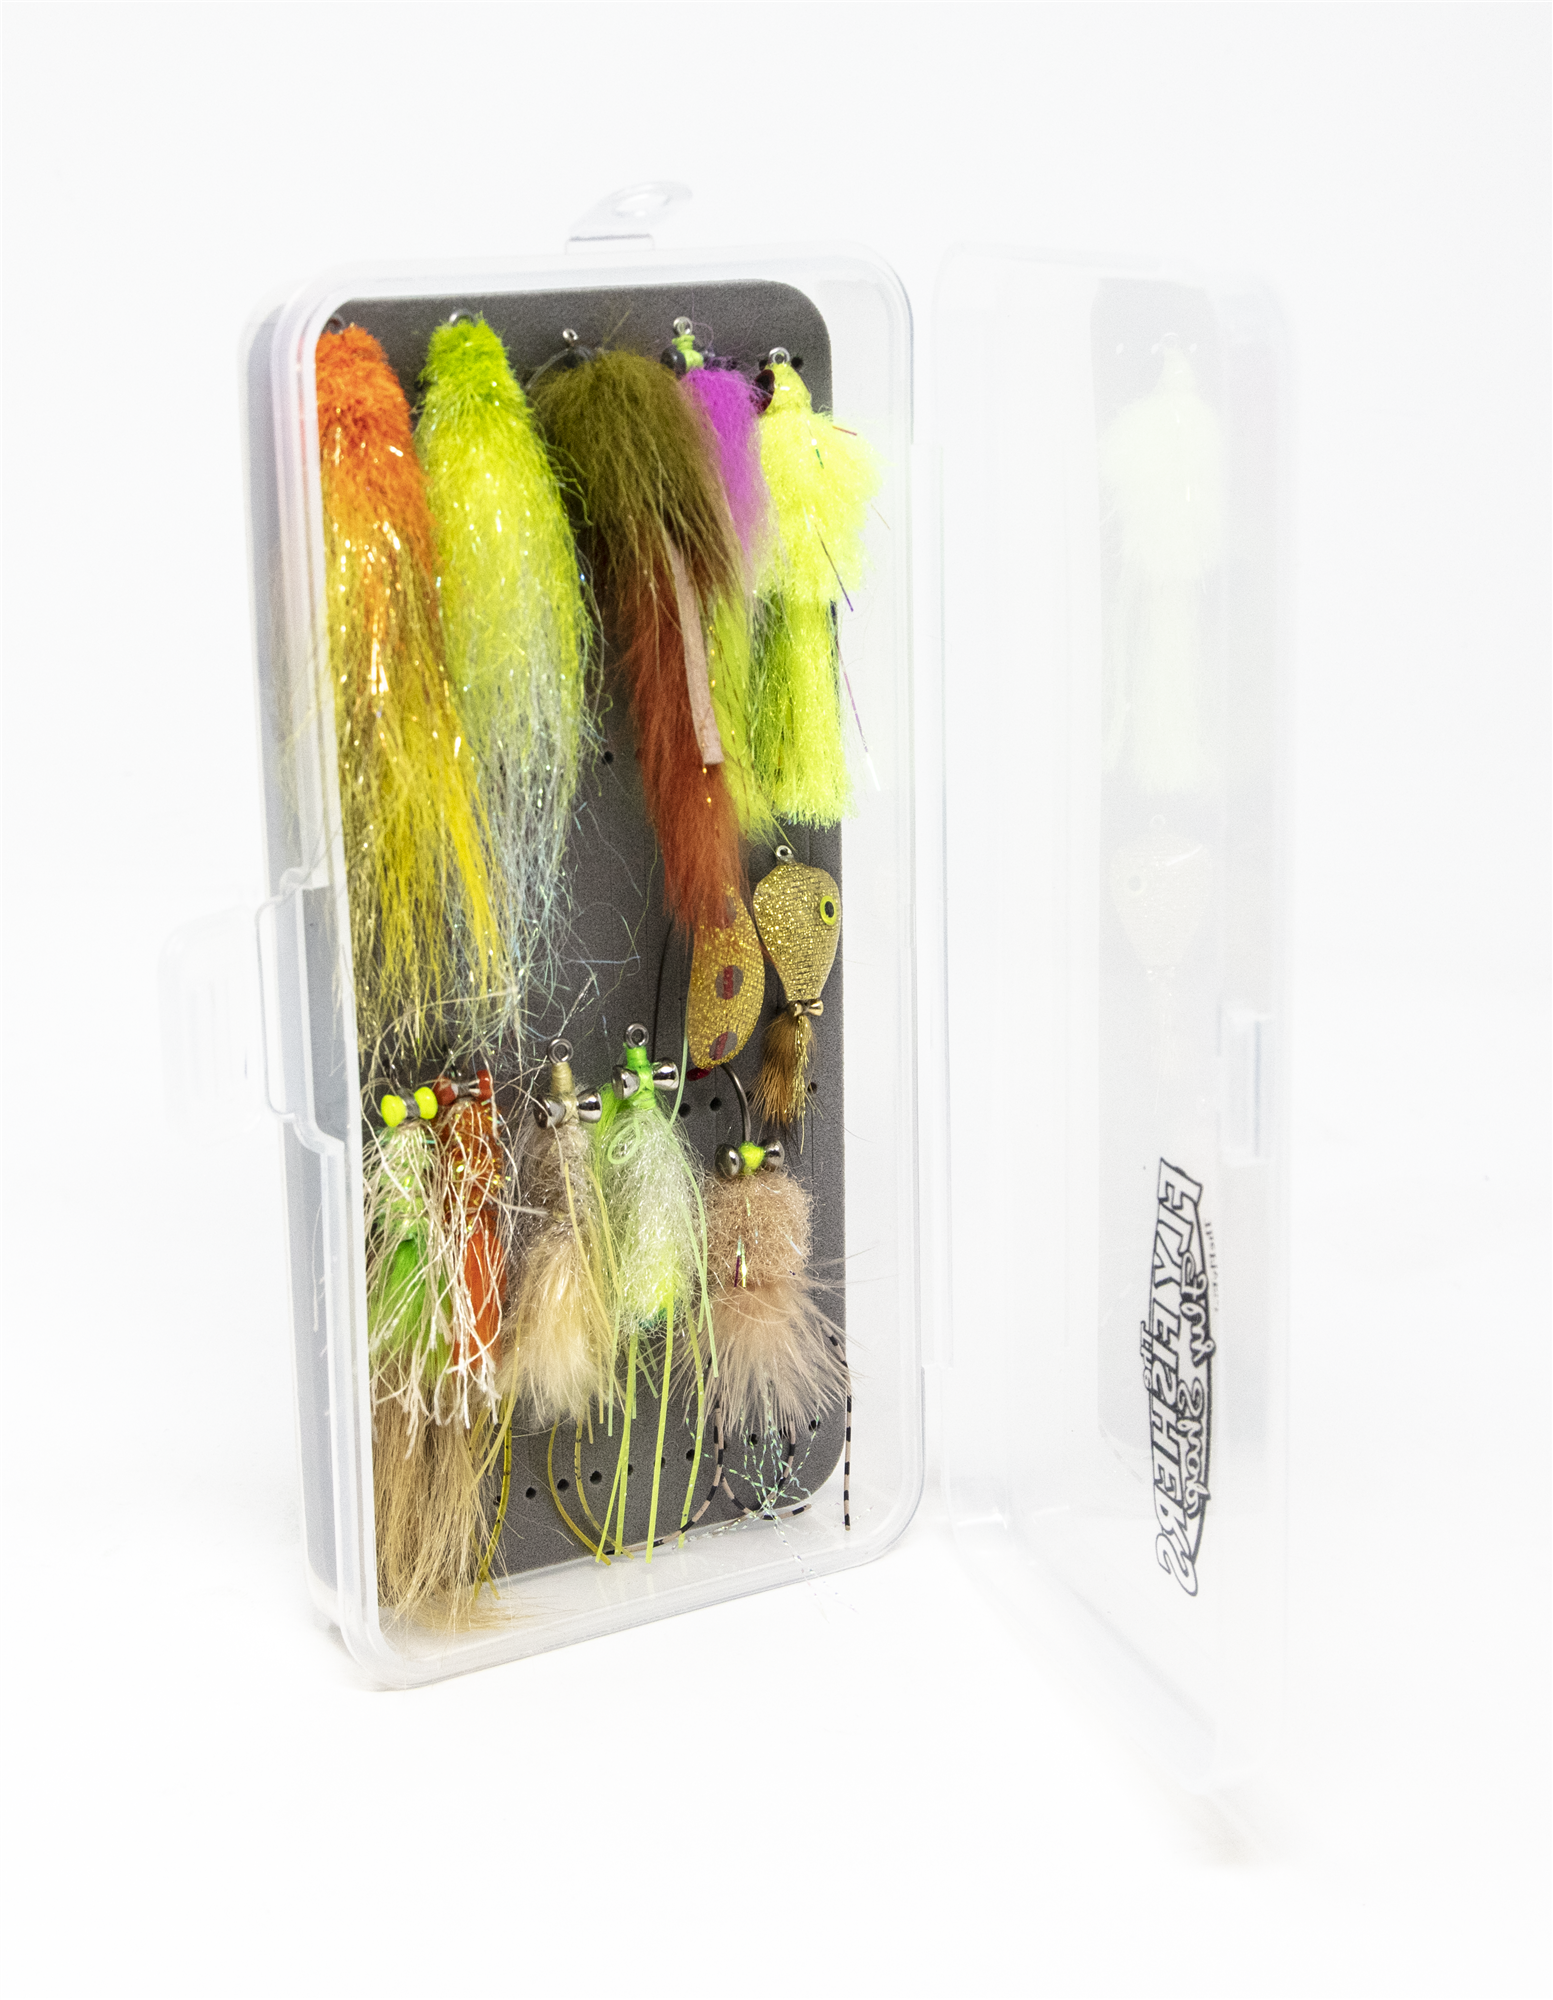 Best Flies For Redfish Assortment is an easy way to get the best redfish fly fishing flies.